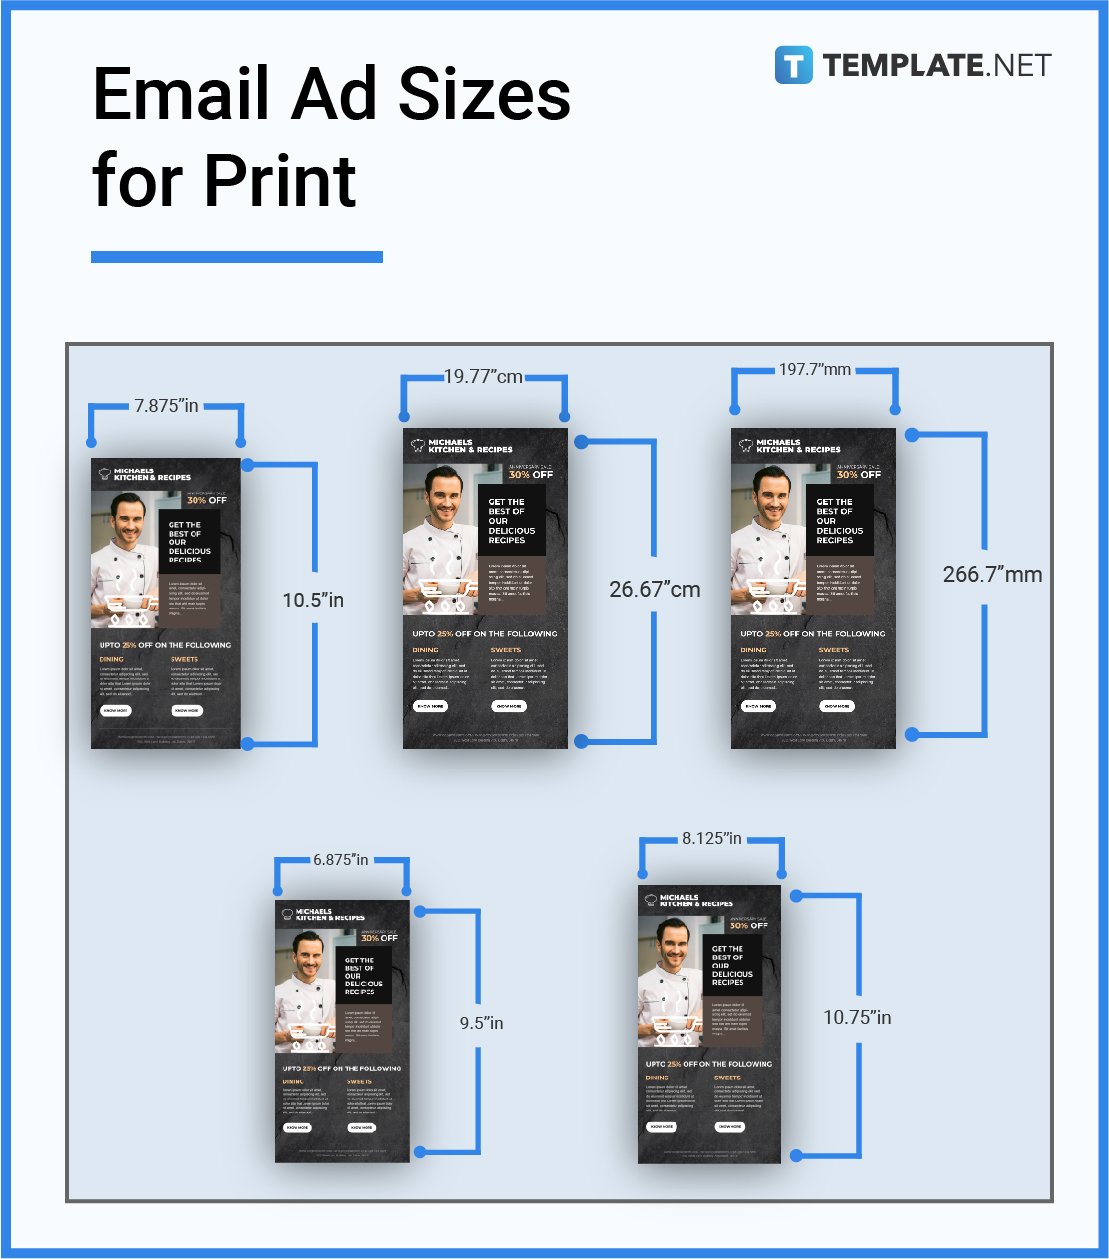 email ad sizes for print